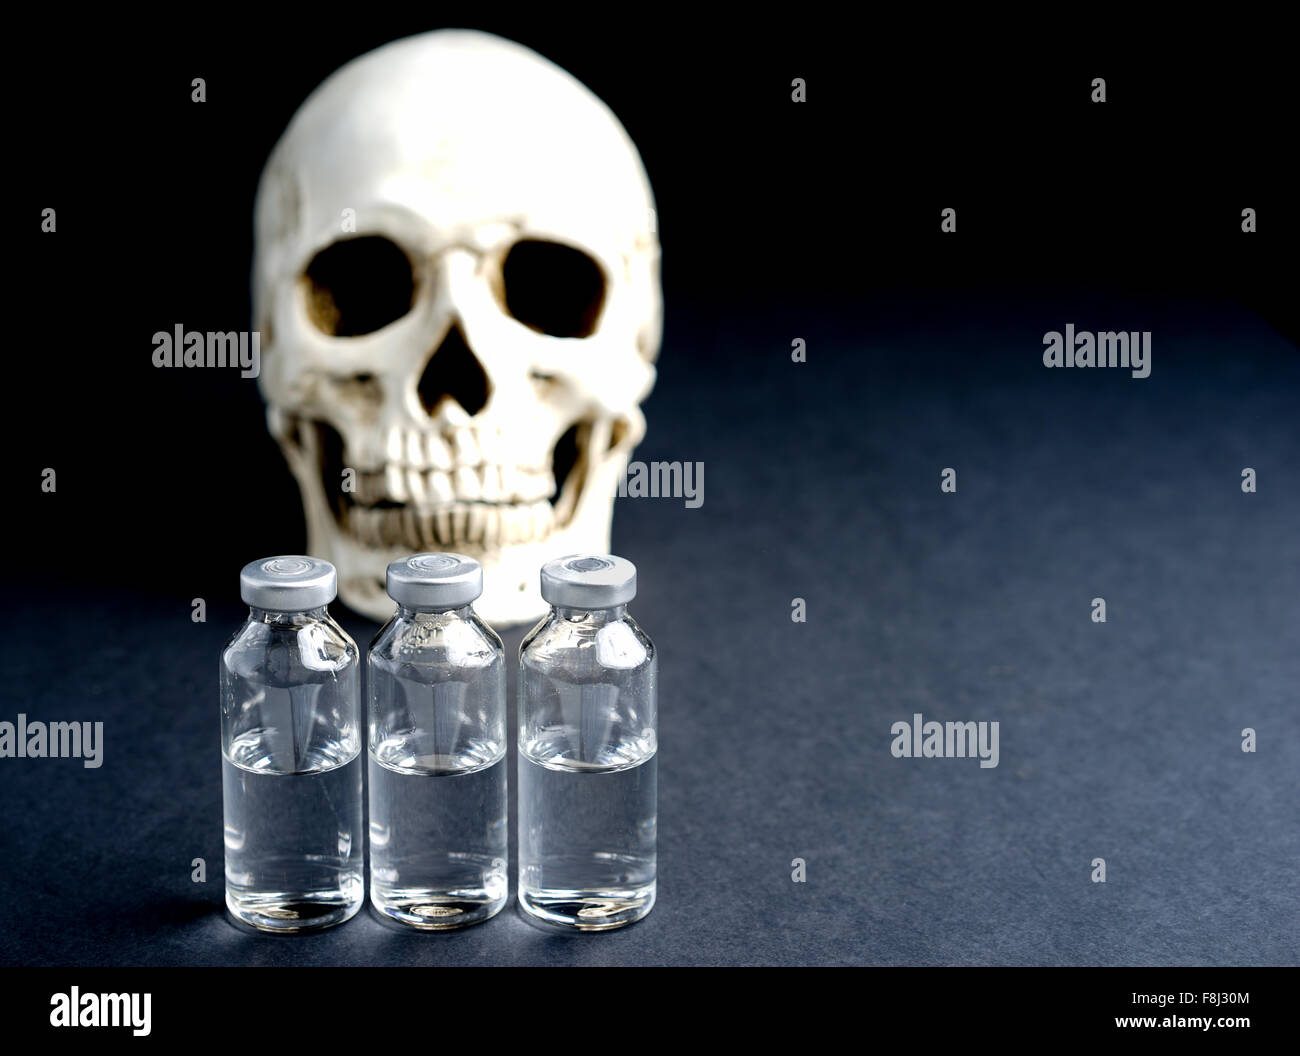 Skull and medical vials risk of death or abuse Stock Photo